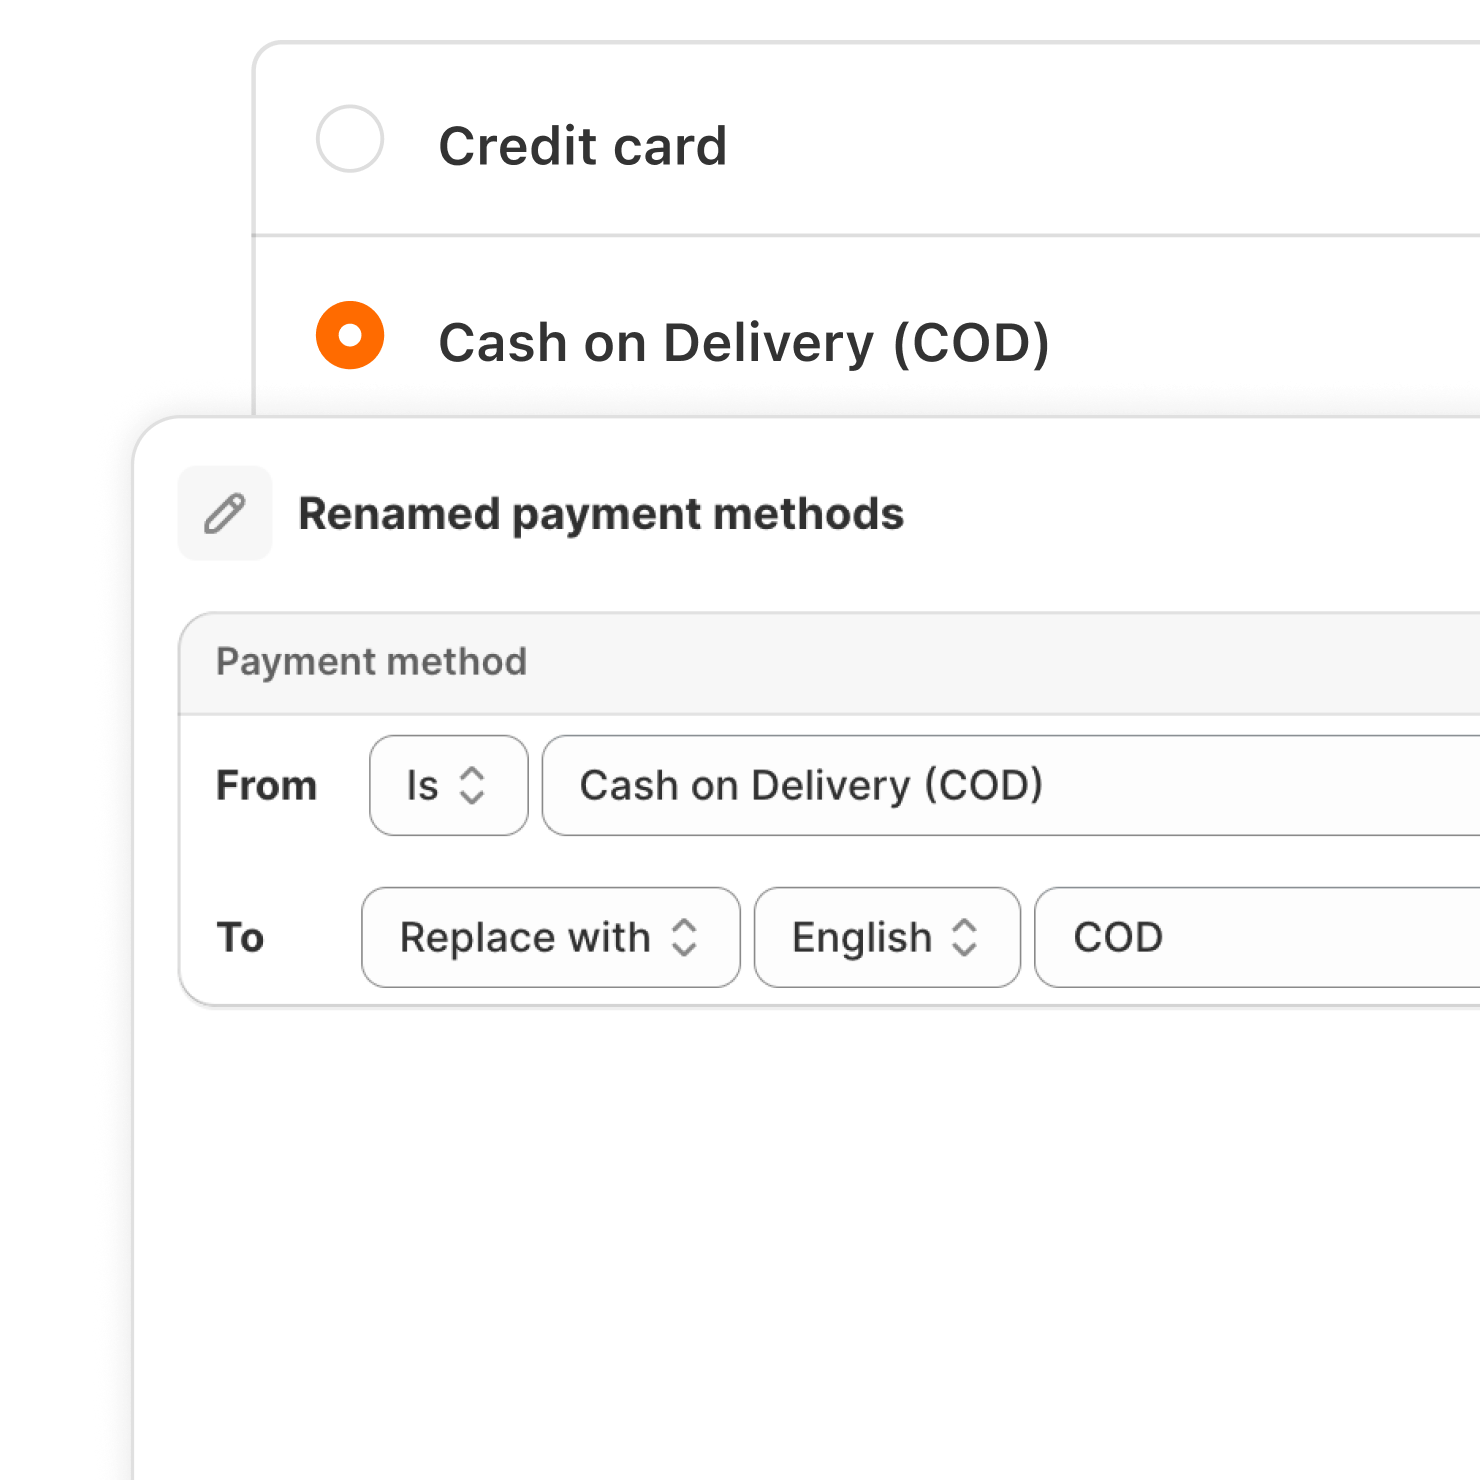 Rename payment methods image